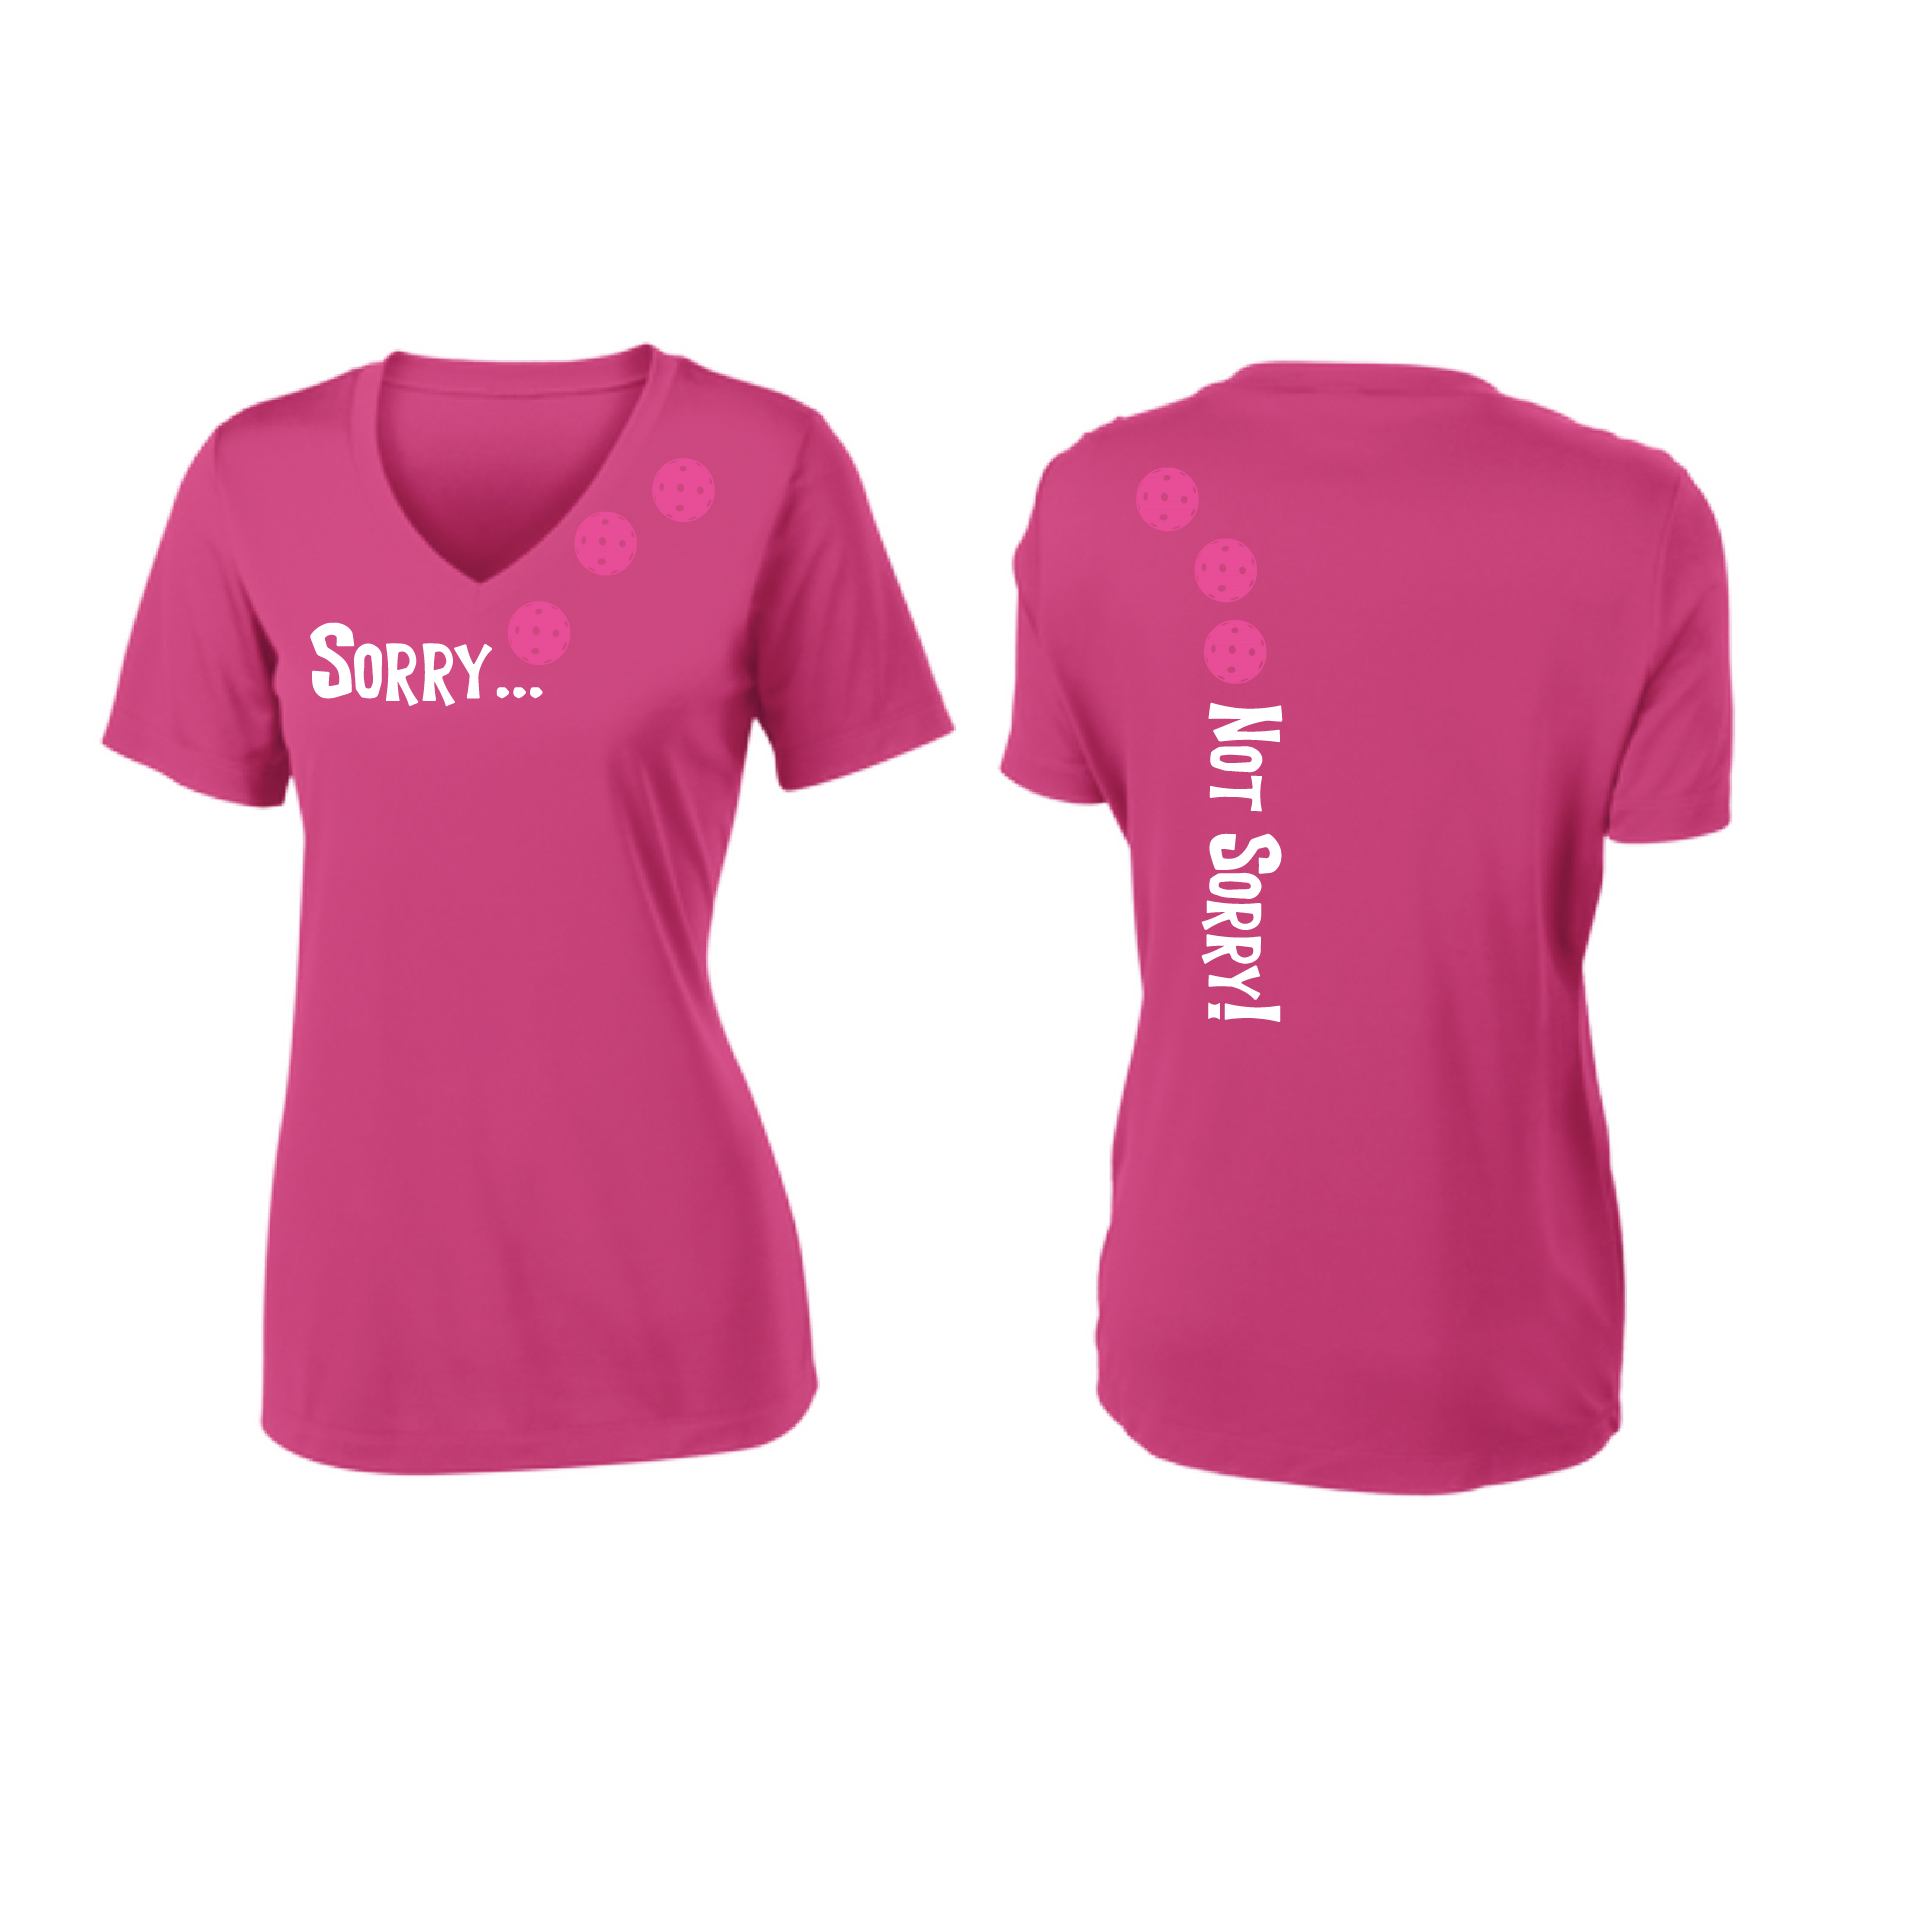 Pickleball Design: Sorry...Not Sorry with Customizable Ball Color – White, Green, Yellow or Pink Balls. .   Women's Styles: Short-Sleeve V-Neck Turn up the volume in this Women's shirt with its perfect mix of softness and attitude. Material is ultra-comfortable with moisture wicking properties and tri-blend softness. PosiCharge technology locks in color. Highly breathable and lightweight.